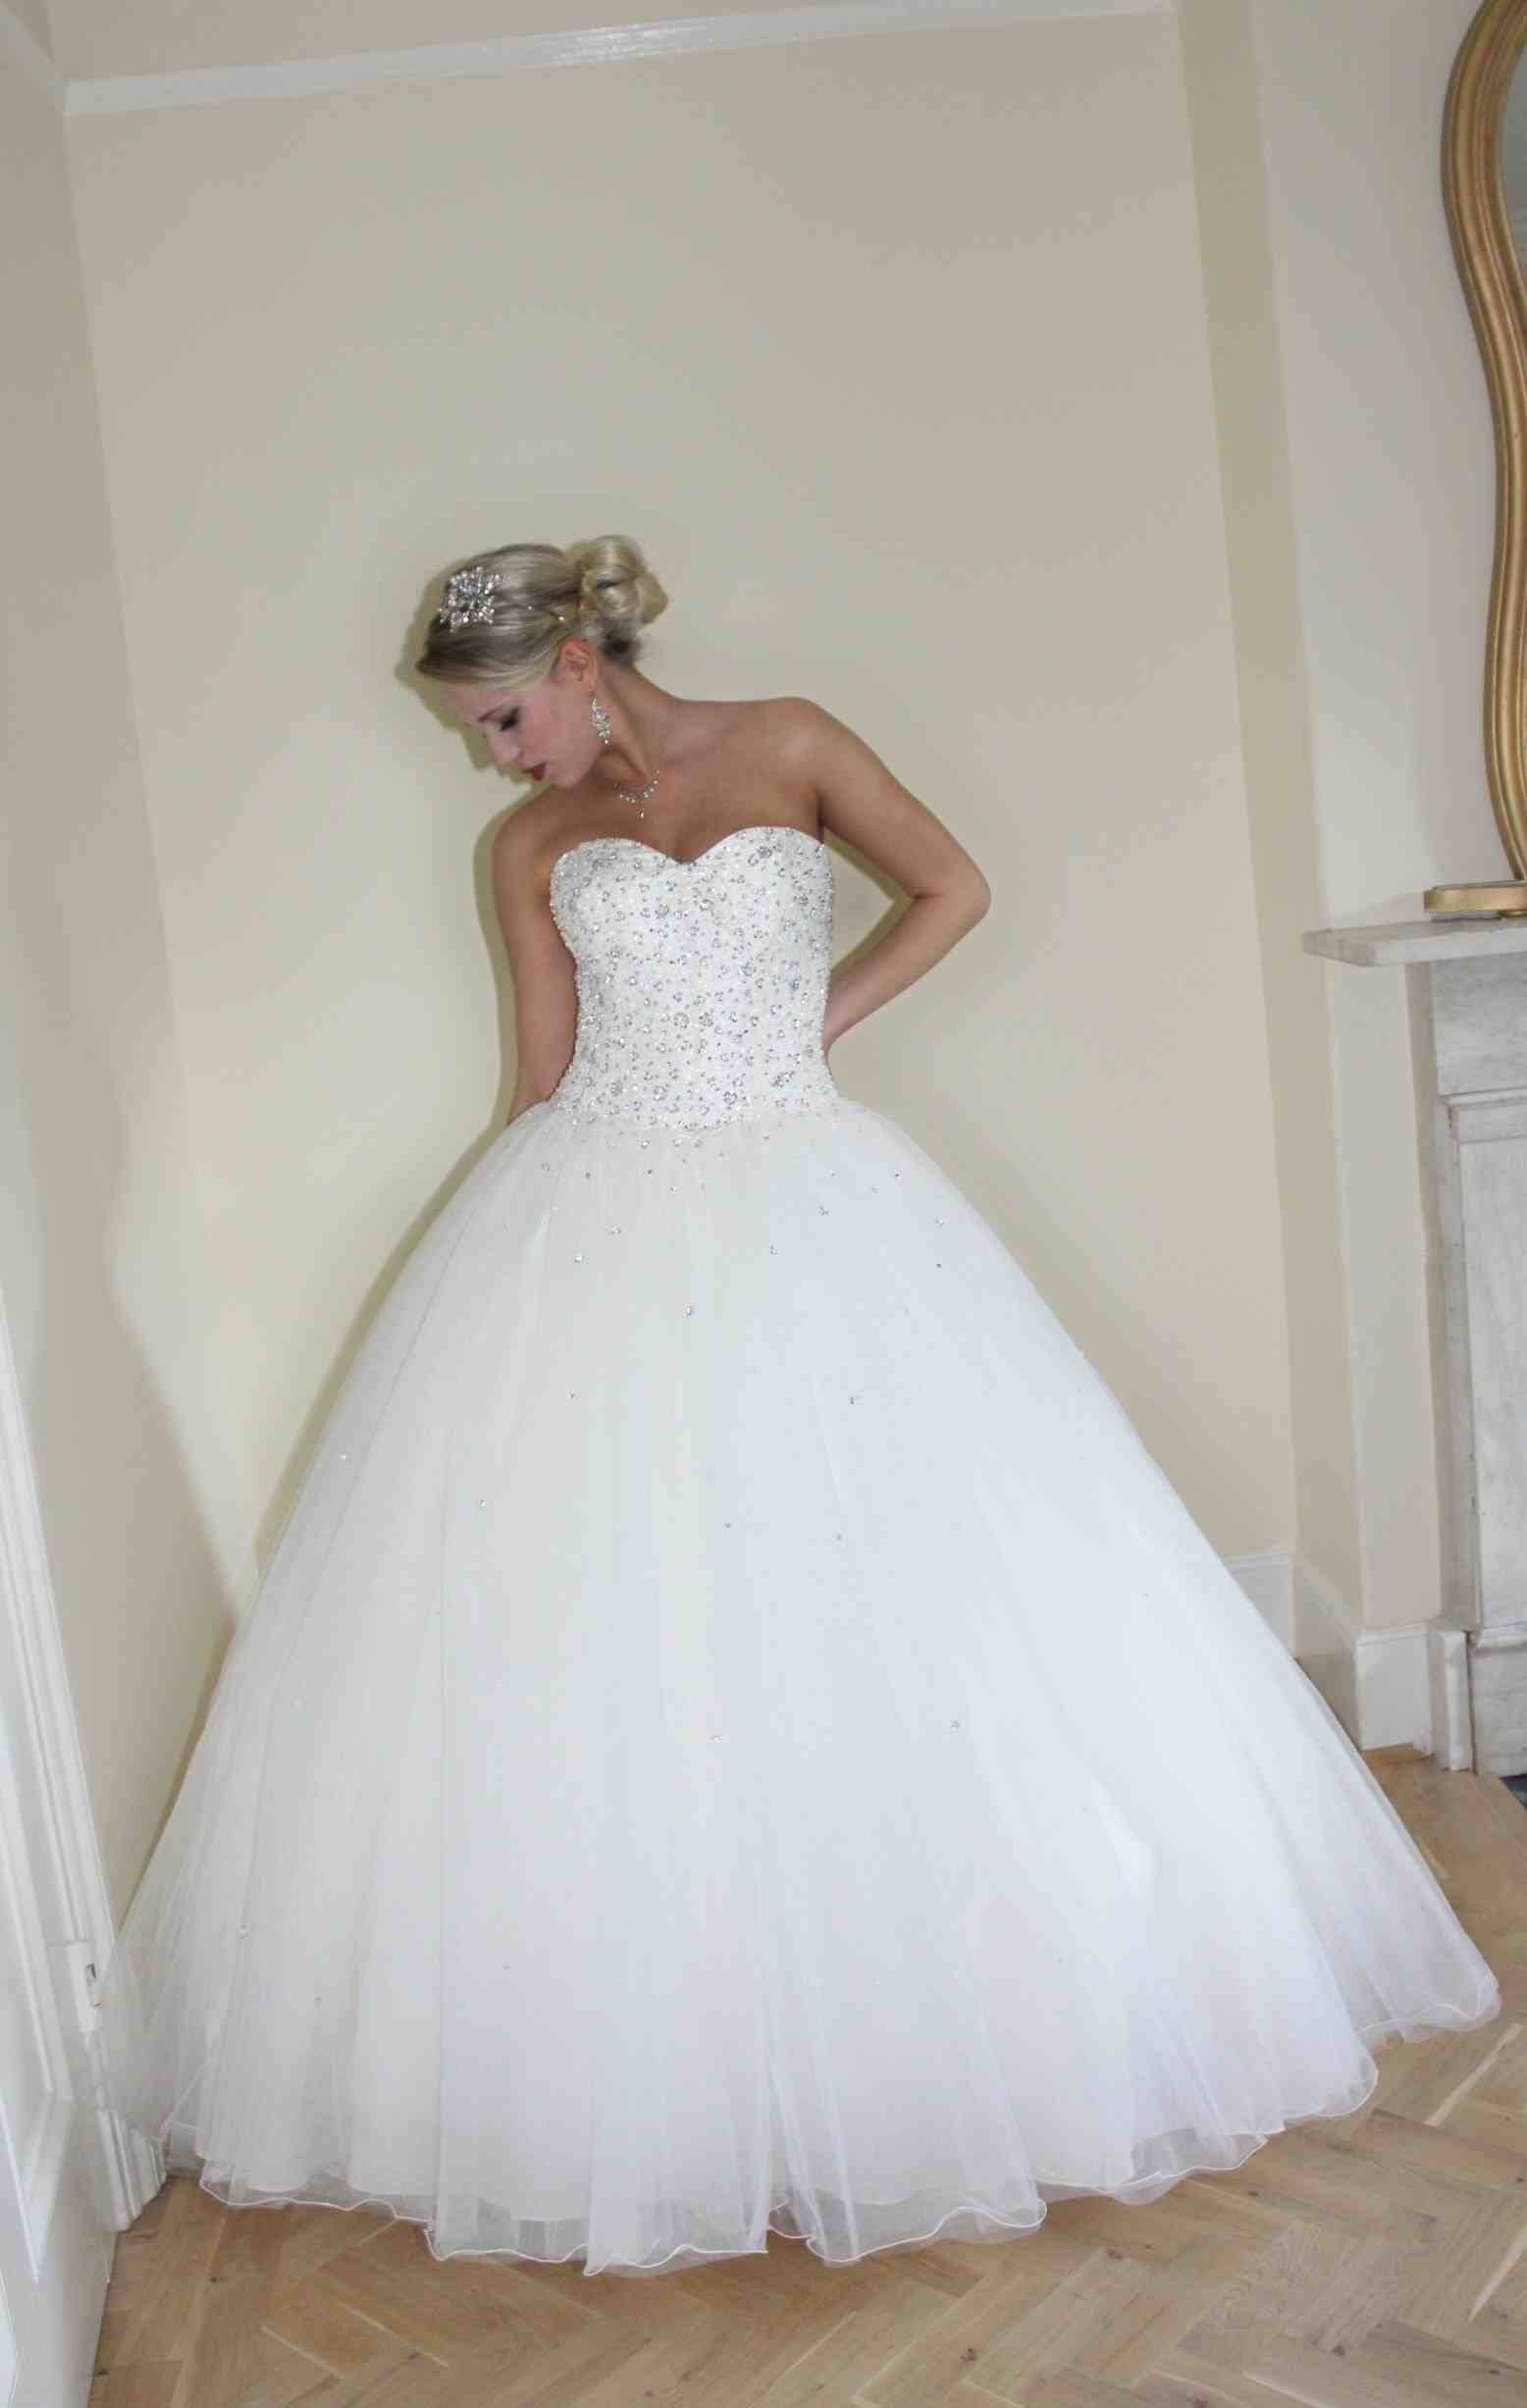 How Much Does A Wedding Dress Cost
 51 New How Much Do sondra Celli Wedding Dresses Cost Pics